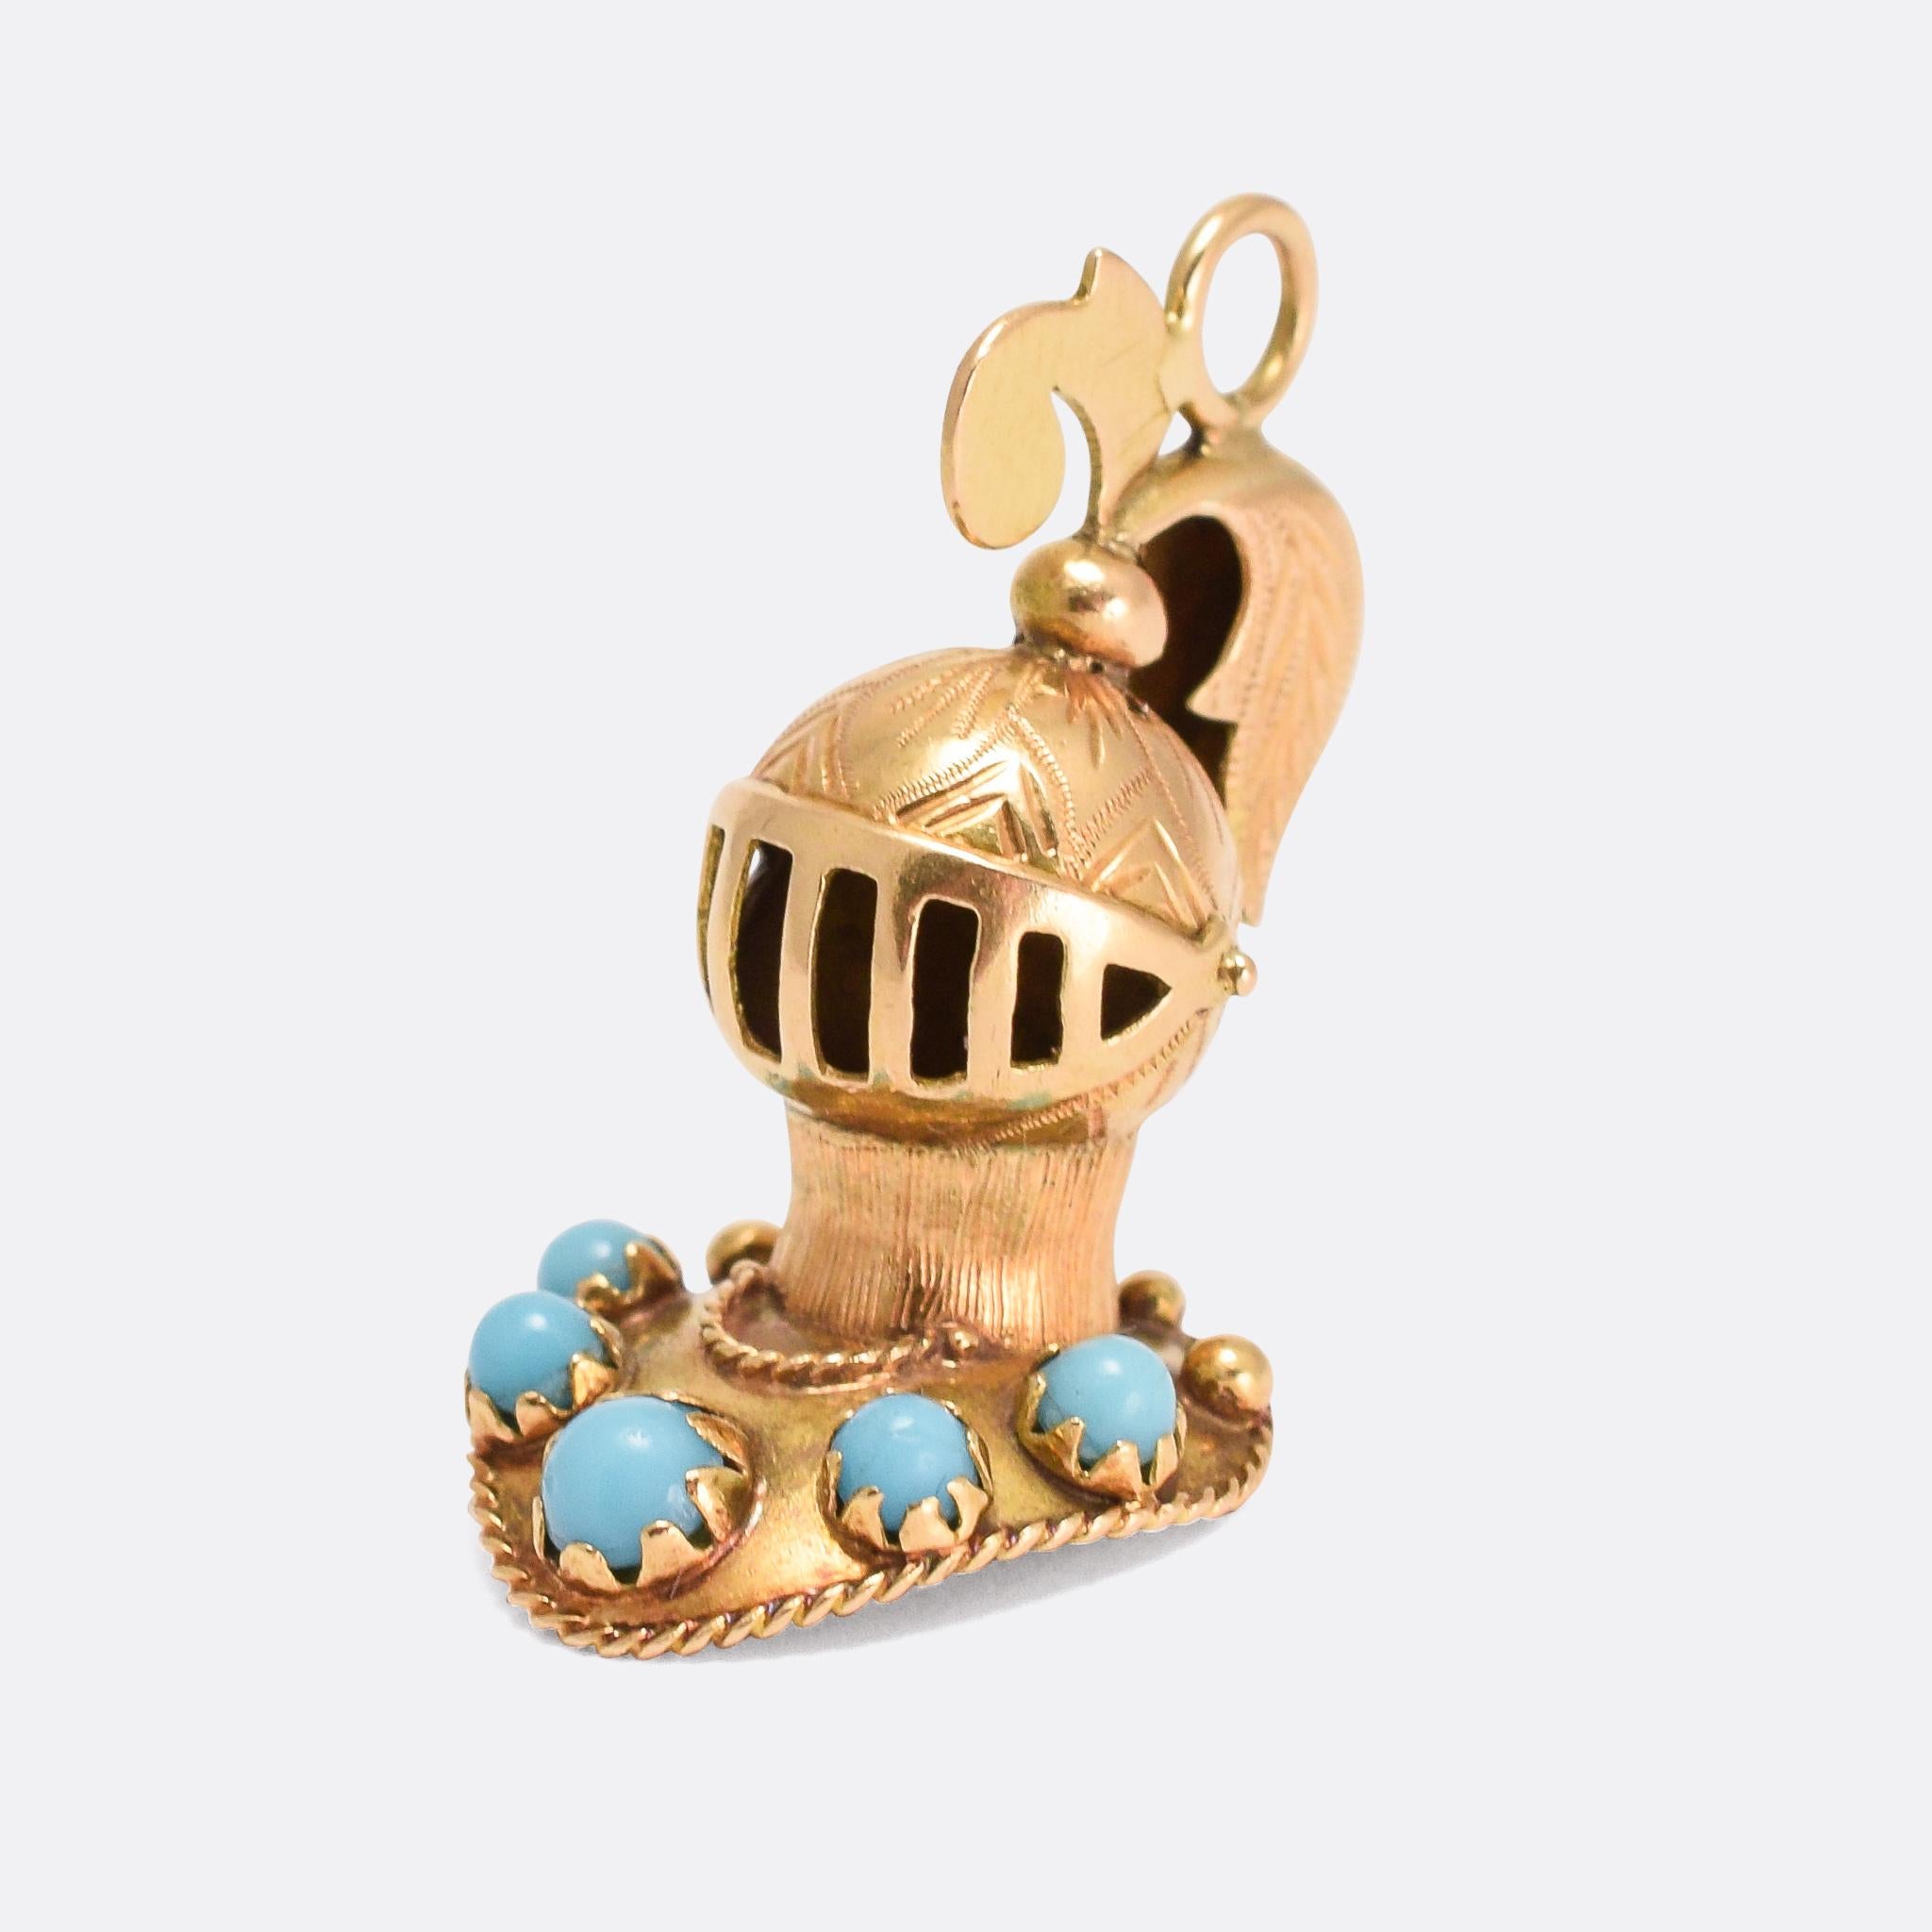 A cool antique Knight's Helm pendant dating from the Victorian era. Constructed from 9k yellow gold throughout, it's set with five turquoise cabochons and wonderfully crafted with openworked visor, applied ropework, feather plume, and hand-chased